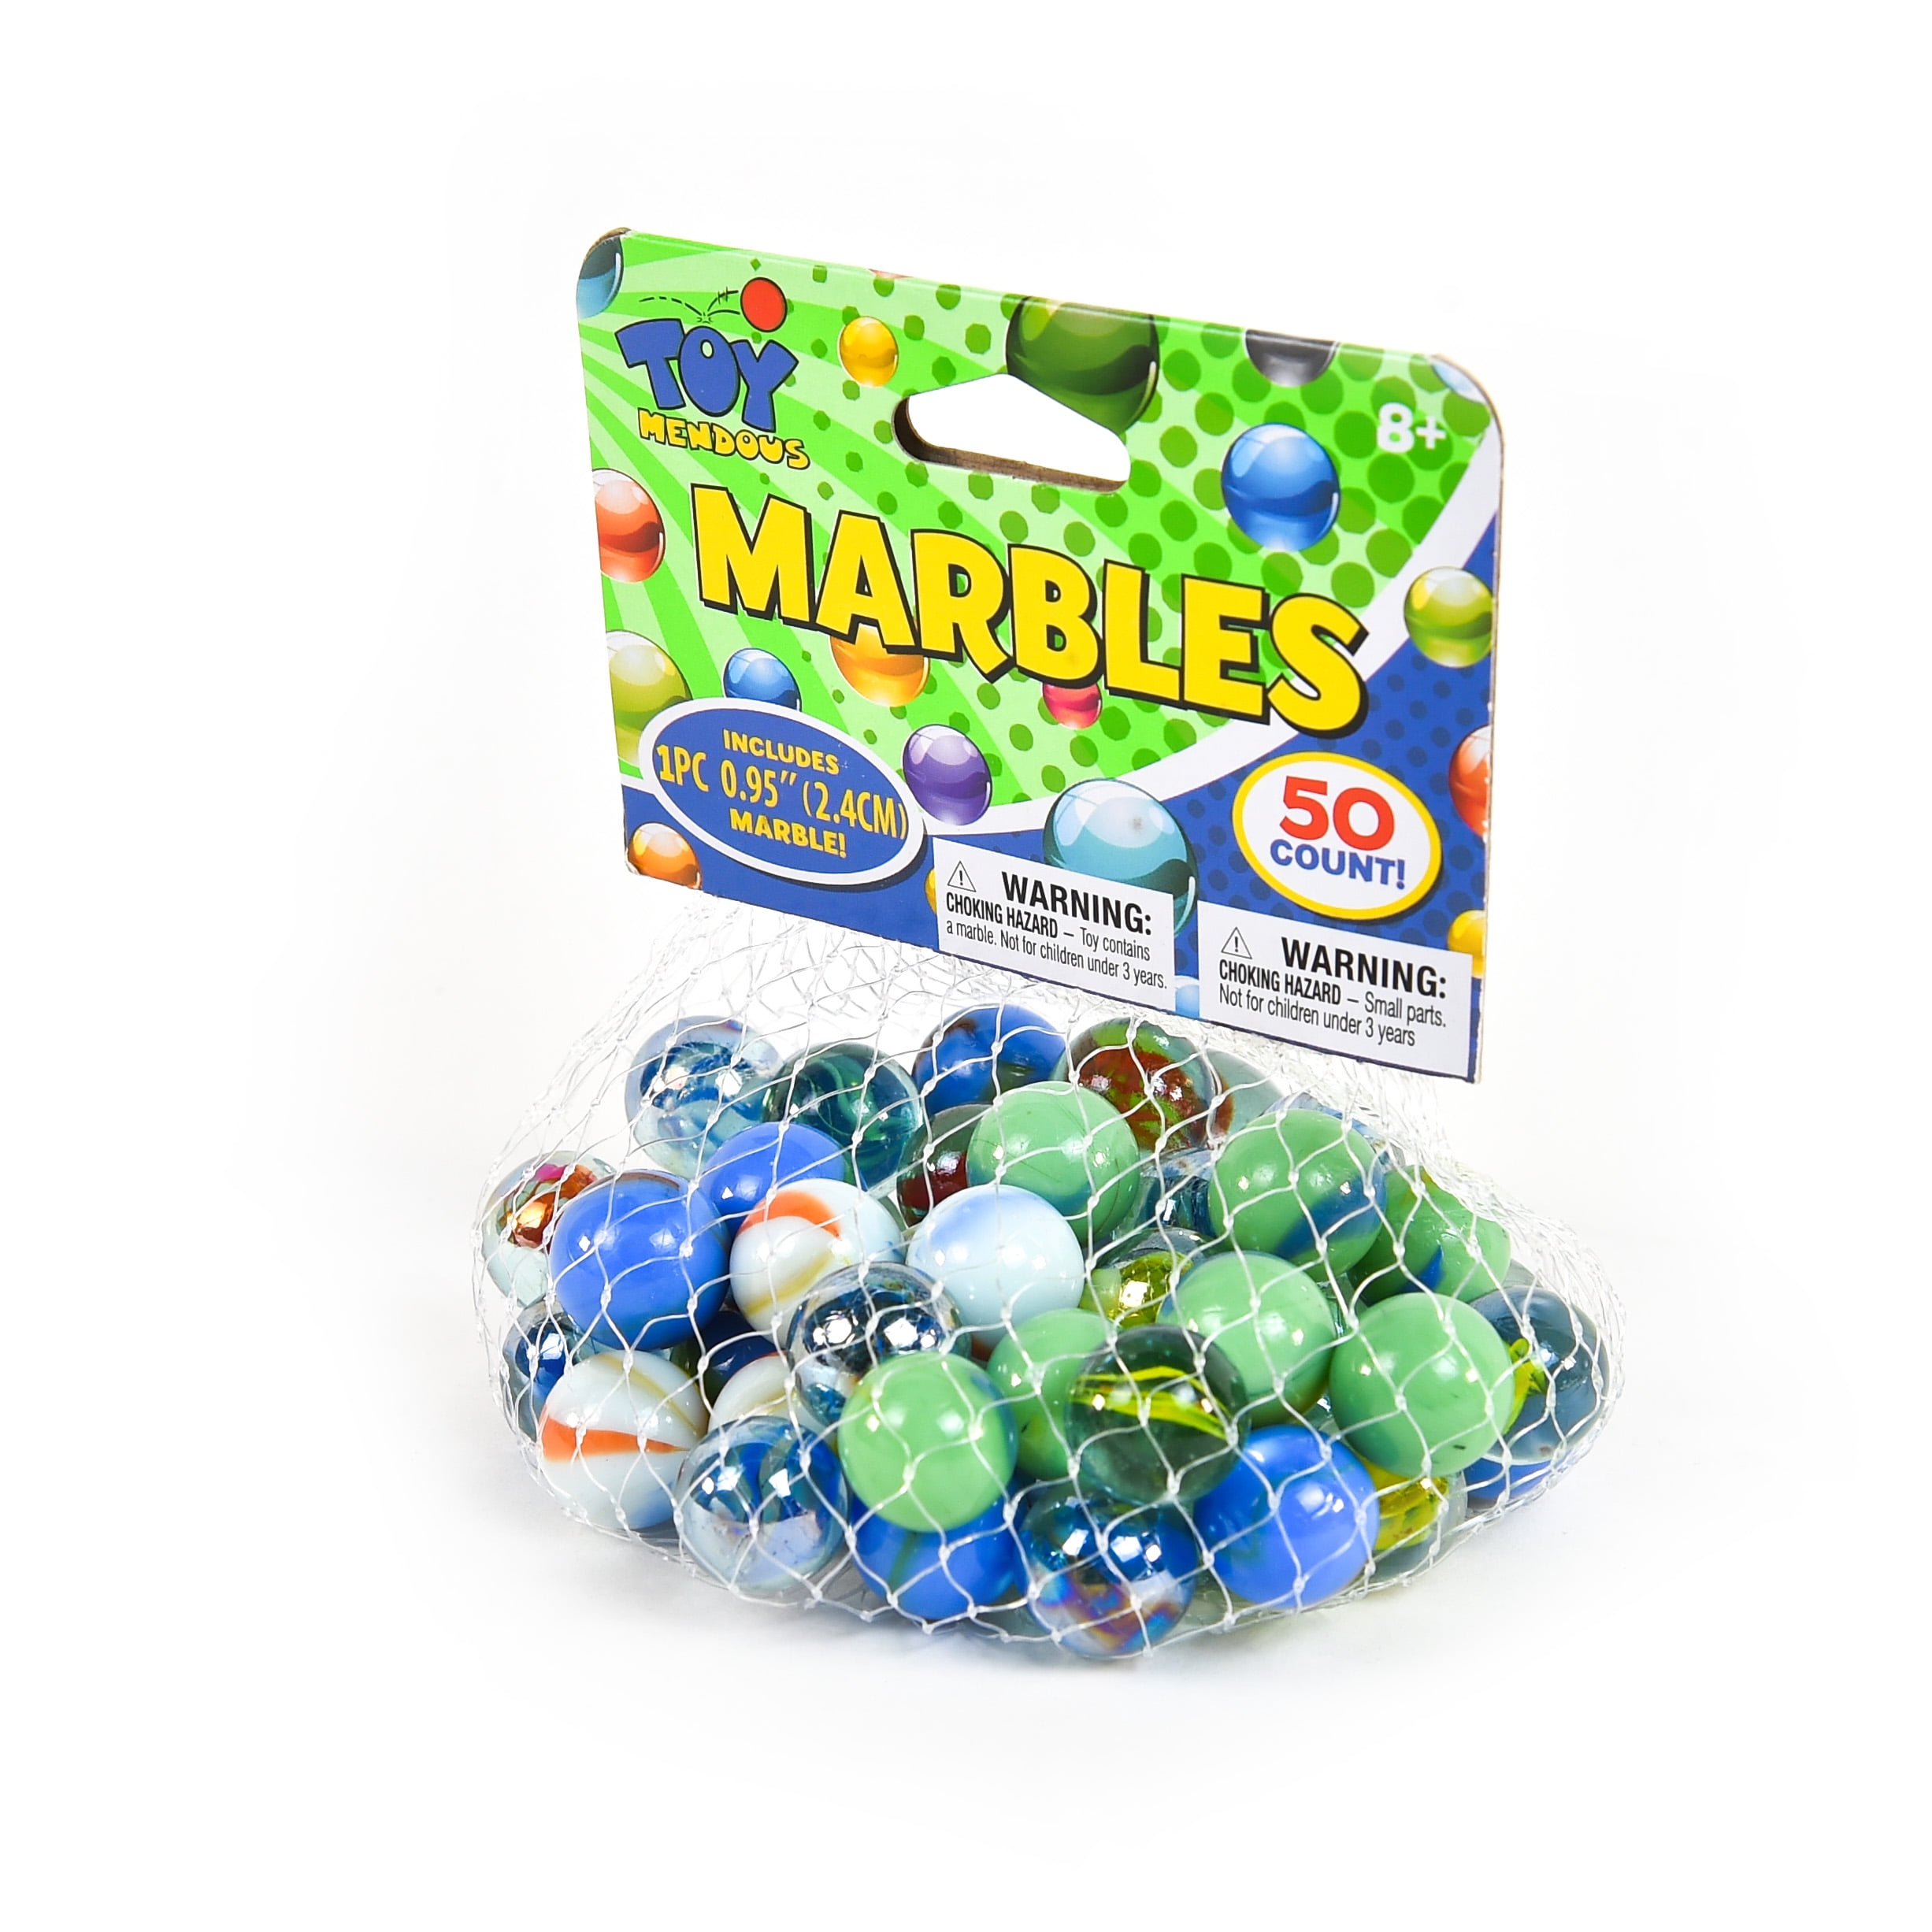 2 Bags Of The Flash TV Show Promo Marbles 